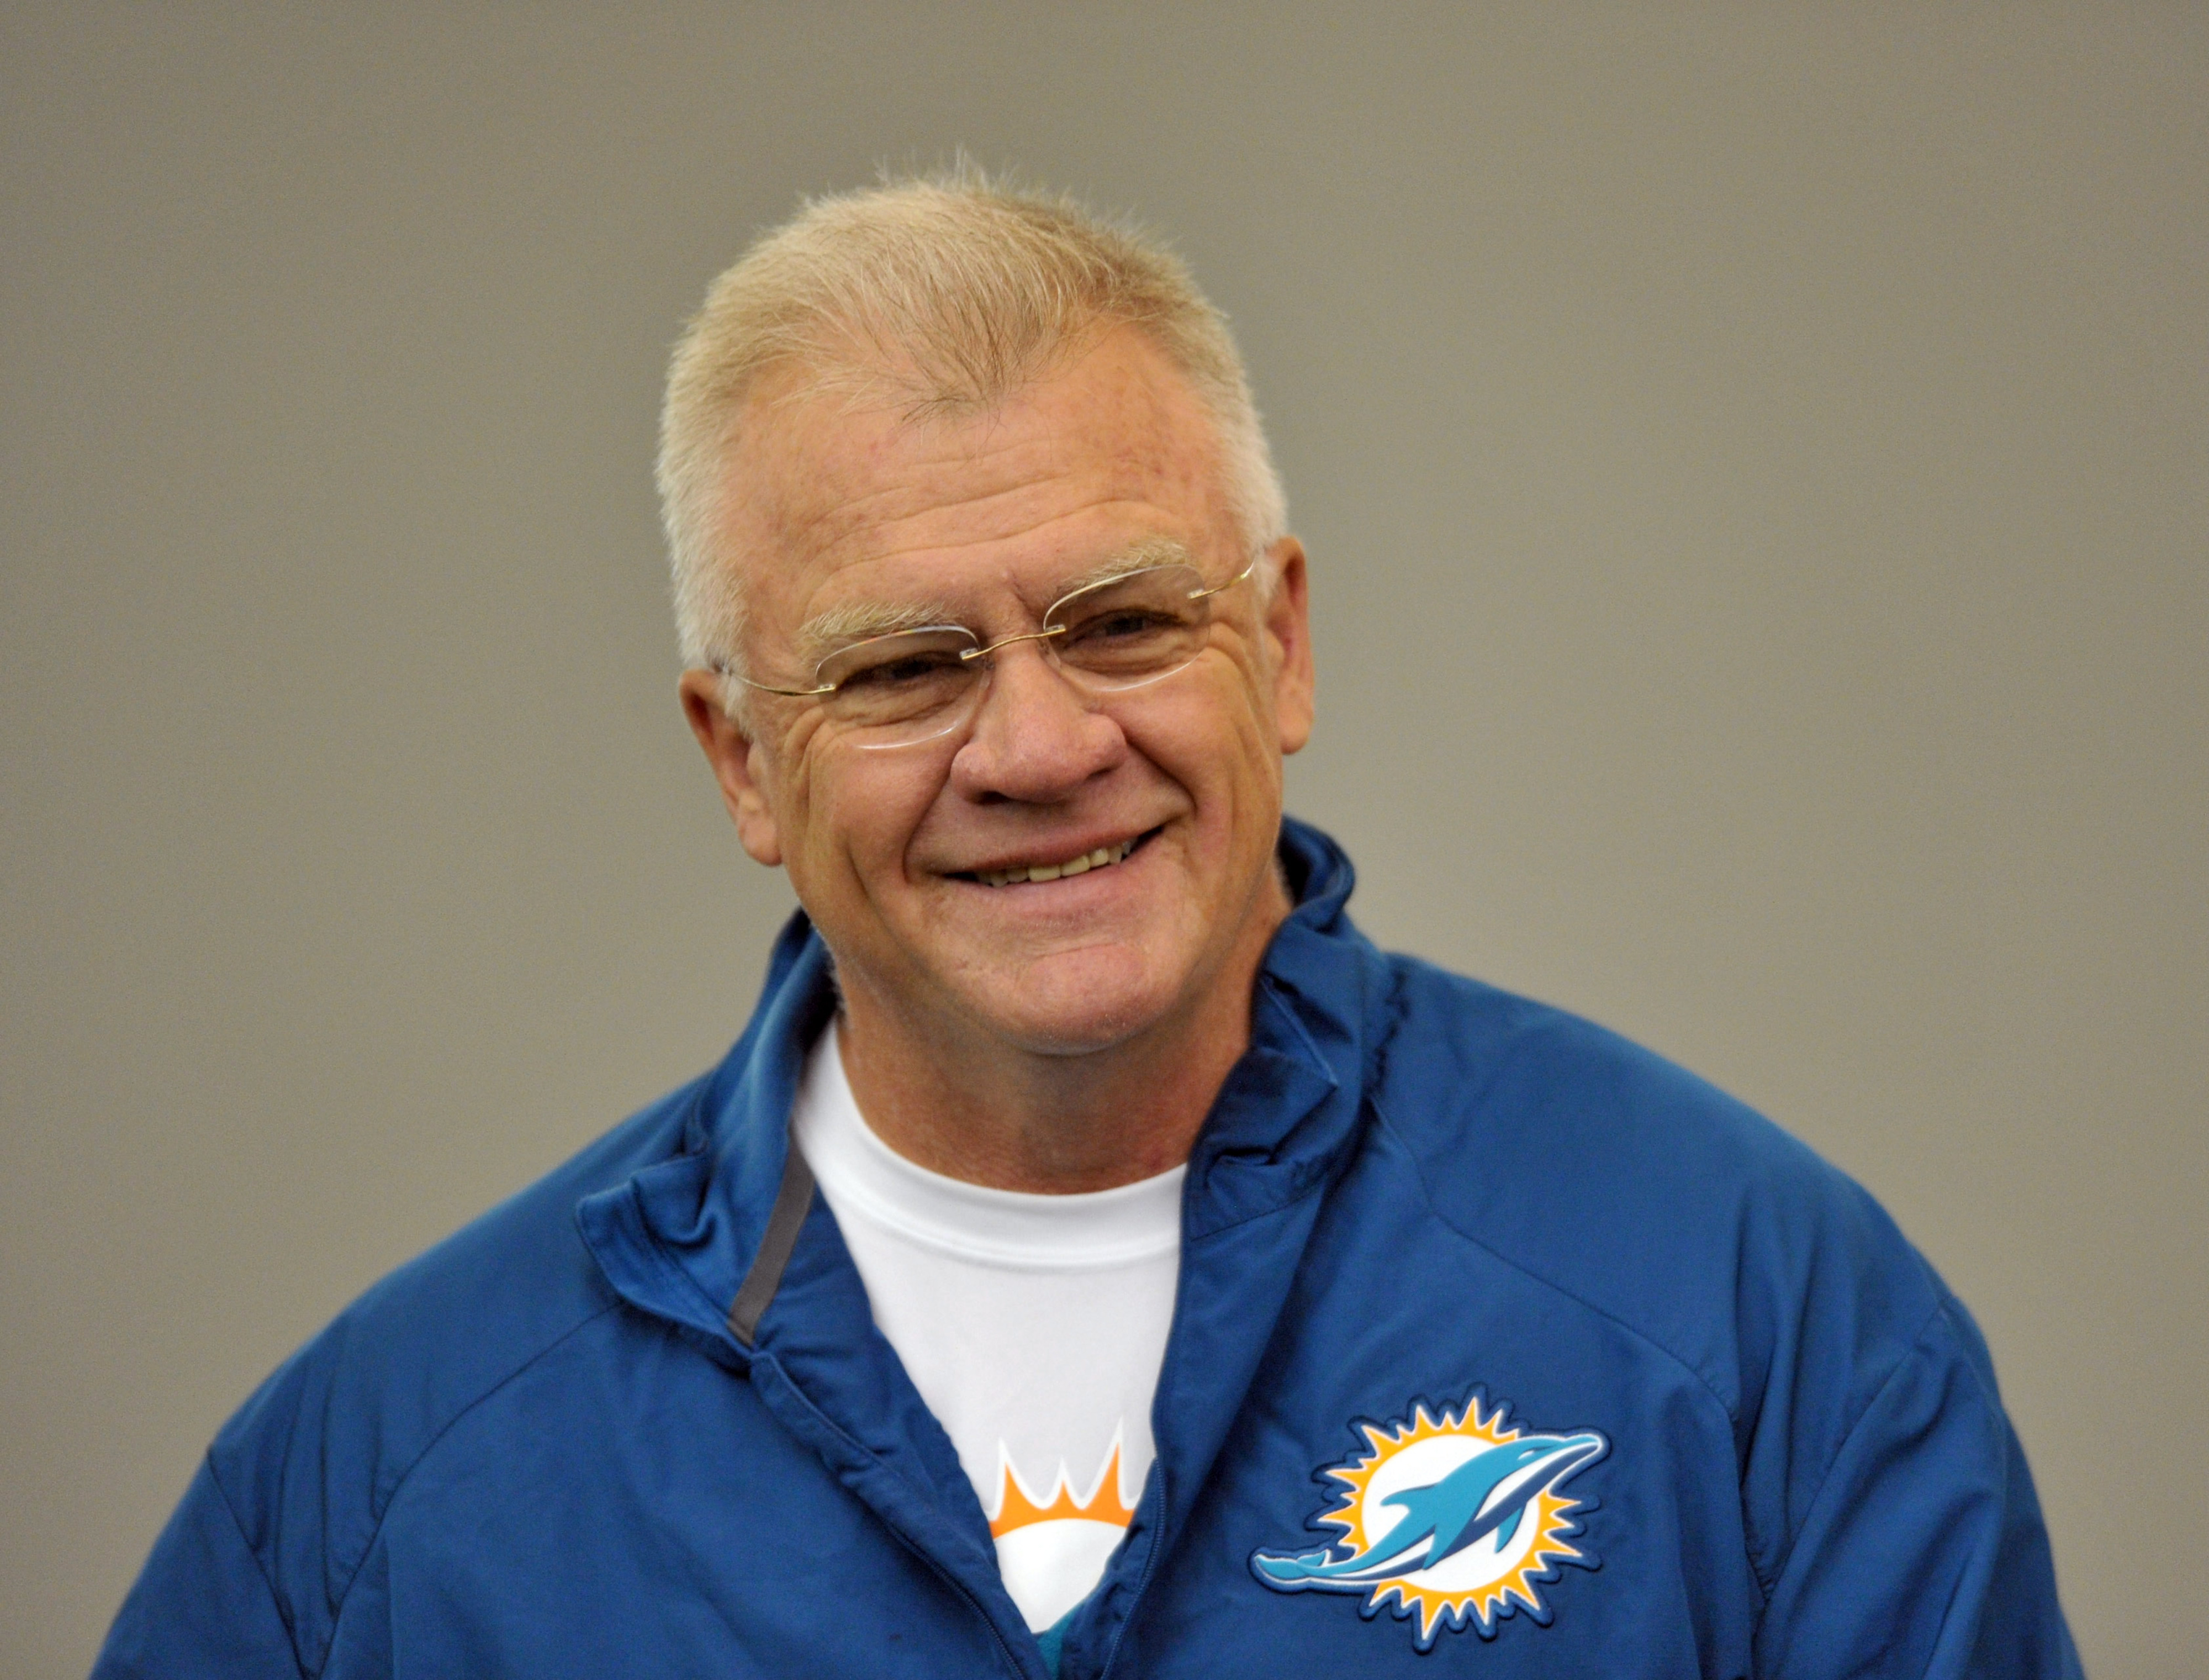 Mike Sherman remembers the 2006 and 2007 seasons in Houston.